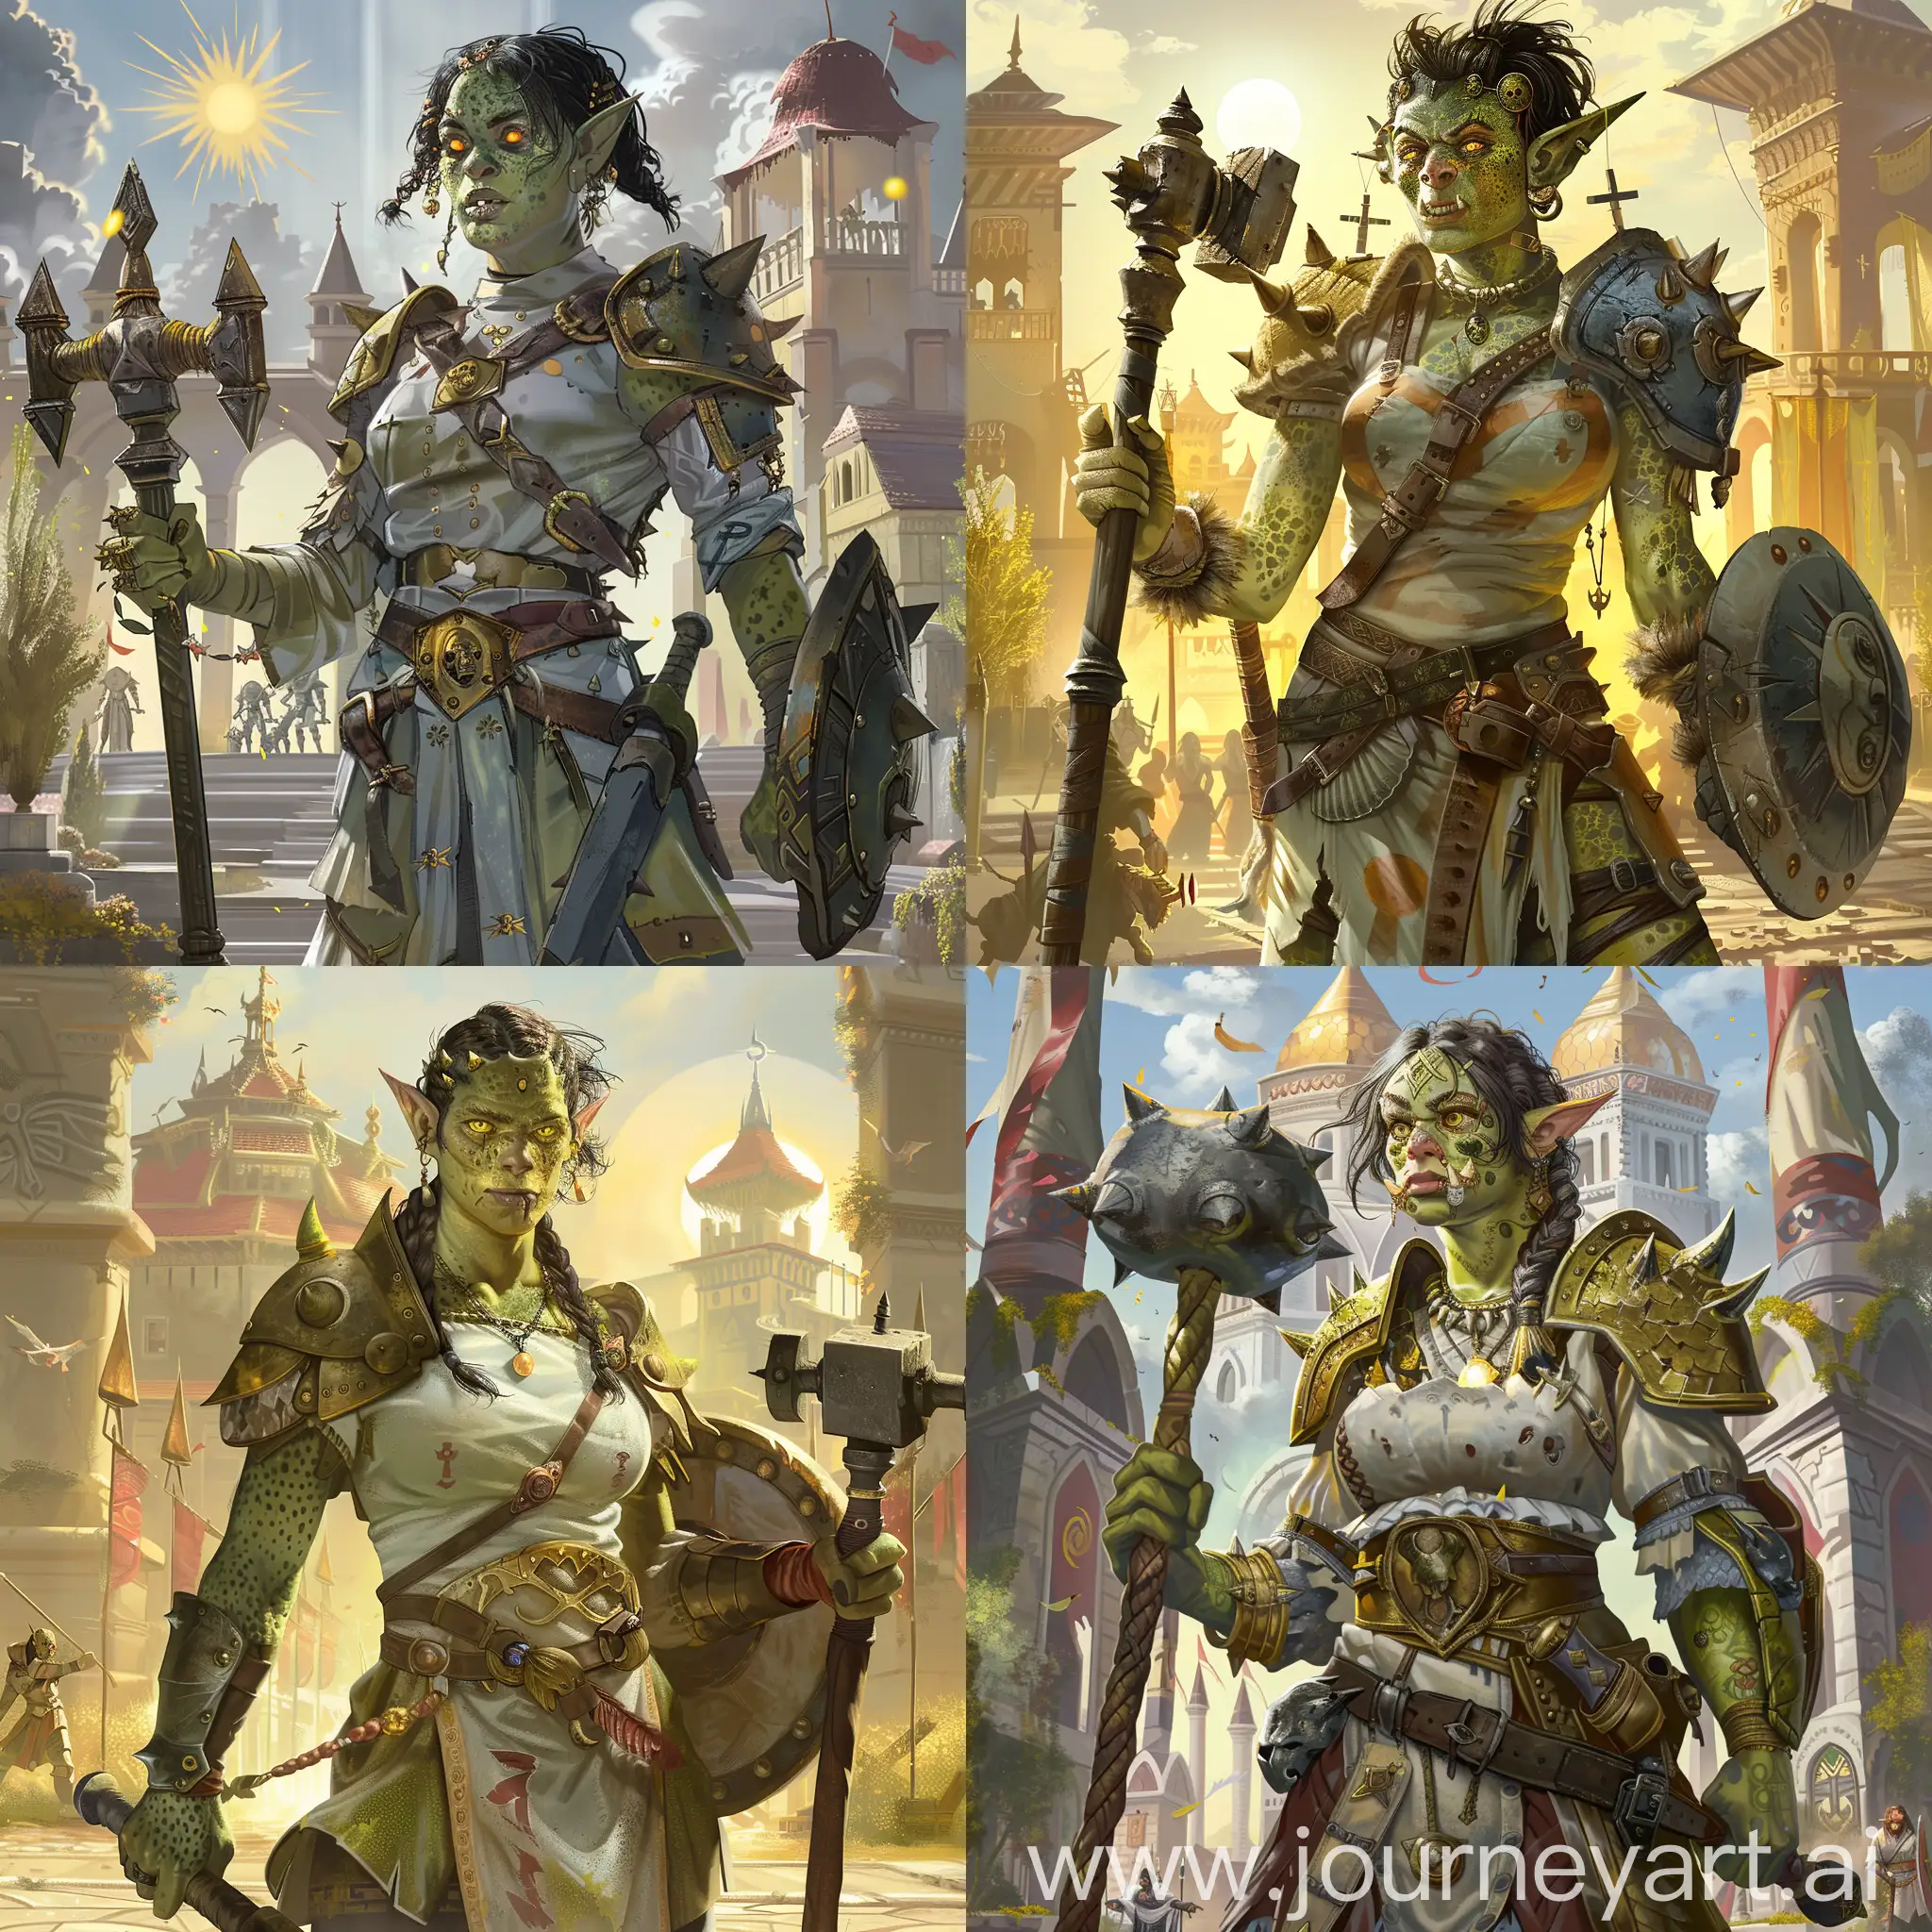 Draw a character from the Dungeons and Dragons universe according to the following description: she is female orc priest, dressed in light medieval warrior clothes. She has a mace and a shield. She has green skin with freckles, yellow eyes, short black hair with little braid. Sharp fangs are visible from under the lower lip. Temple of the solar deity in the background